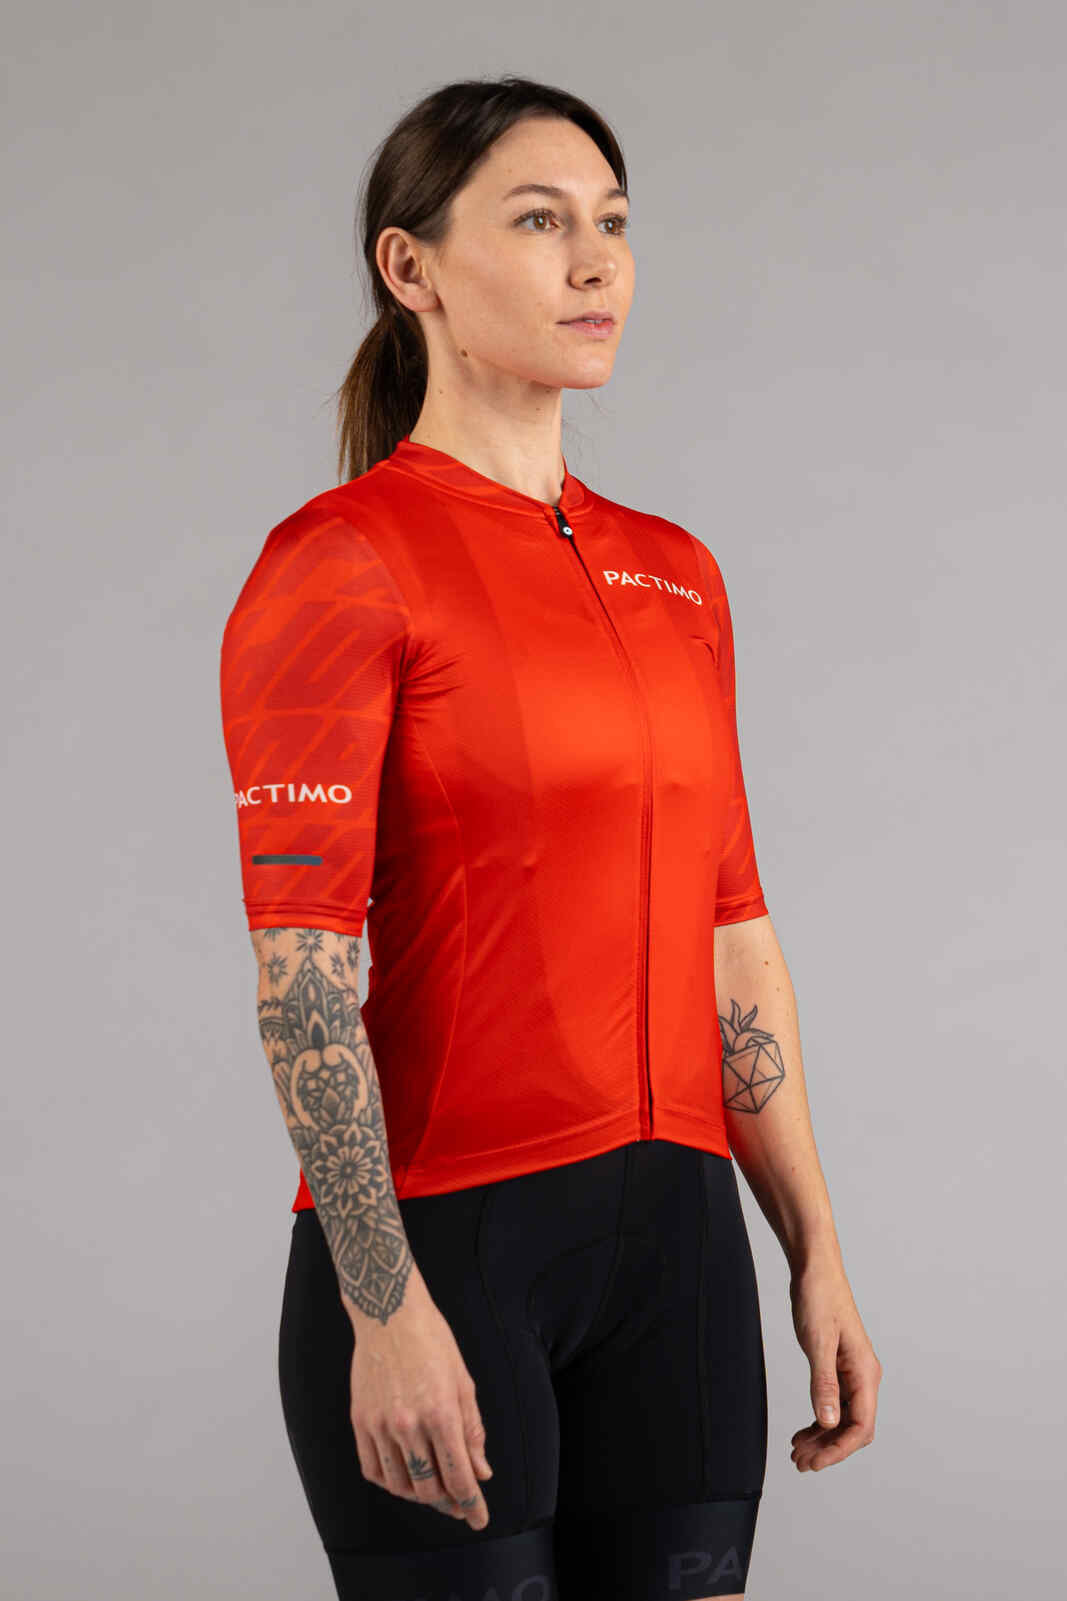 Women's Red Ascent Aero Cycling Jersey - Front View